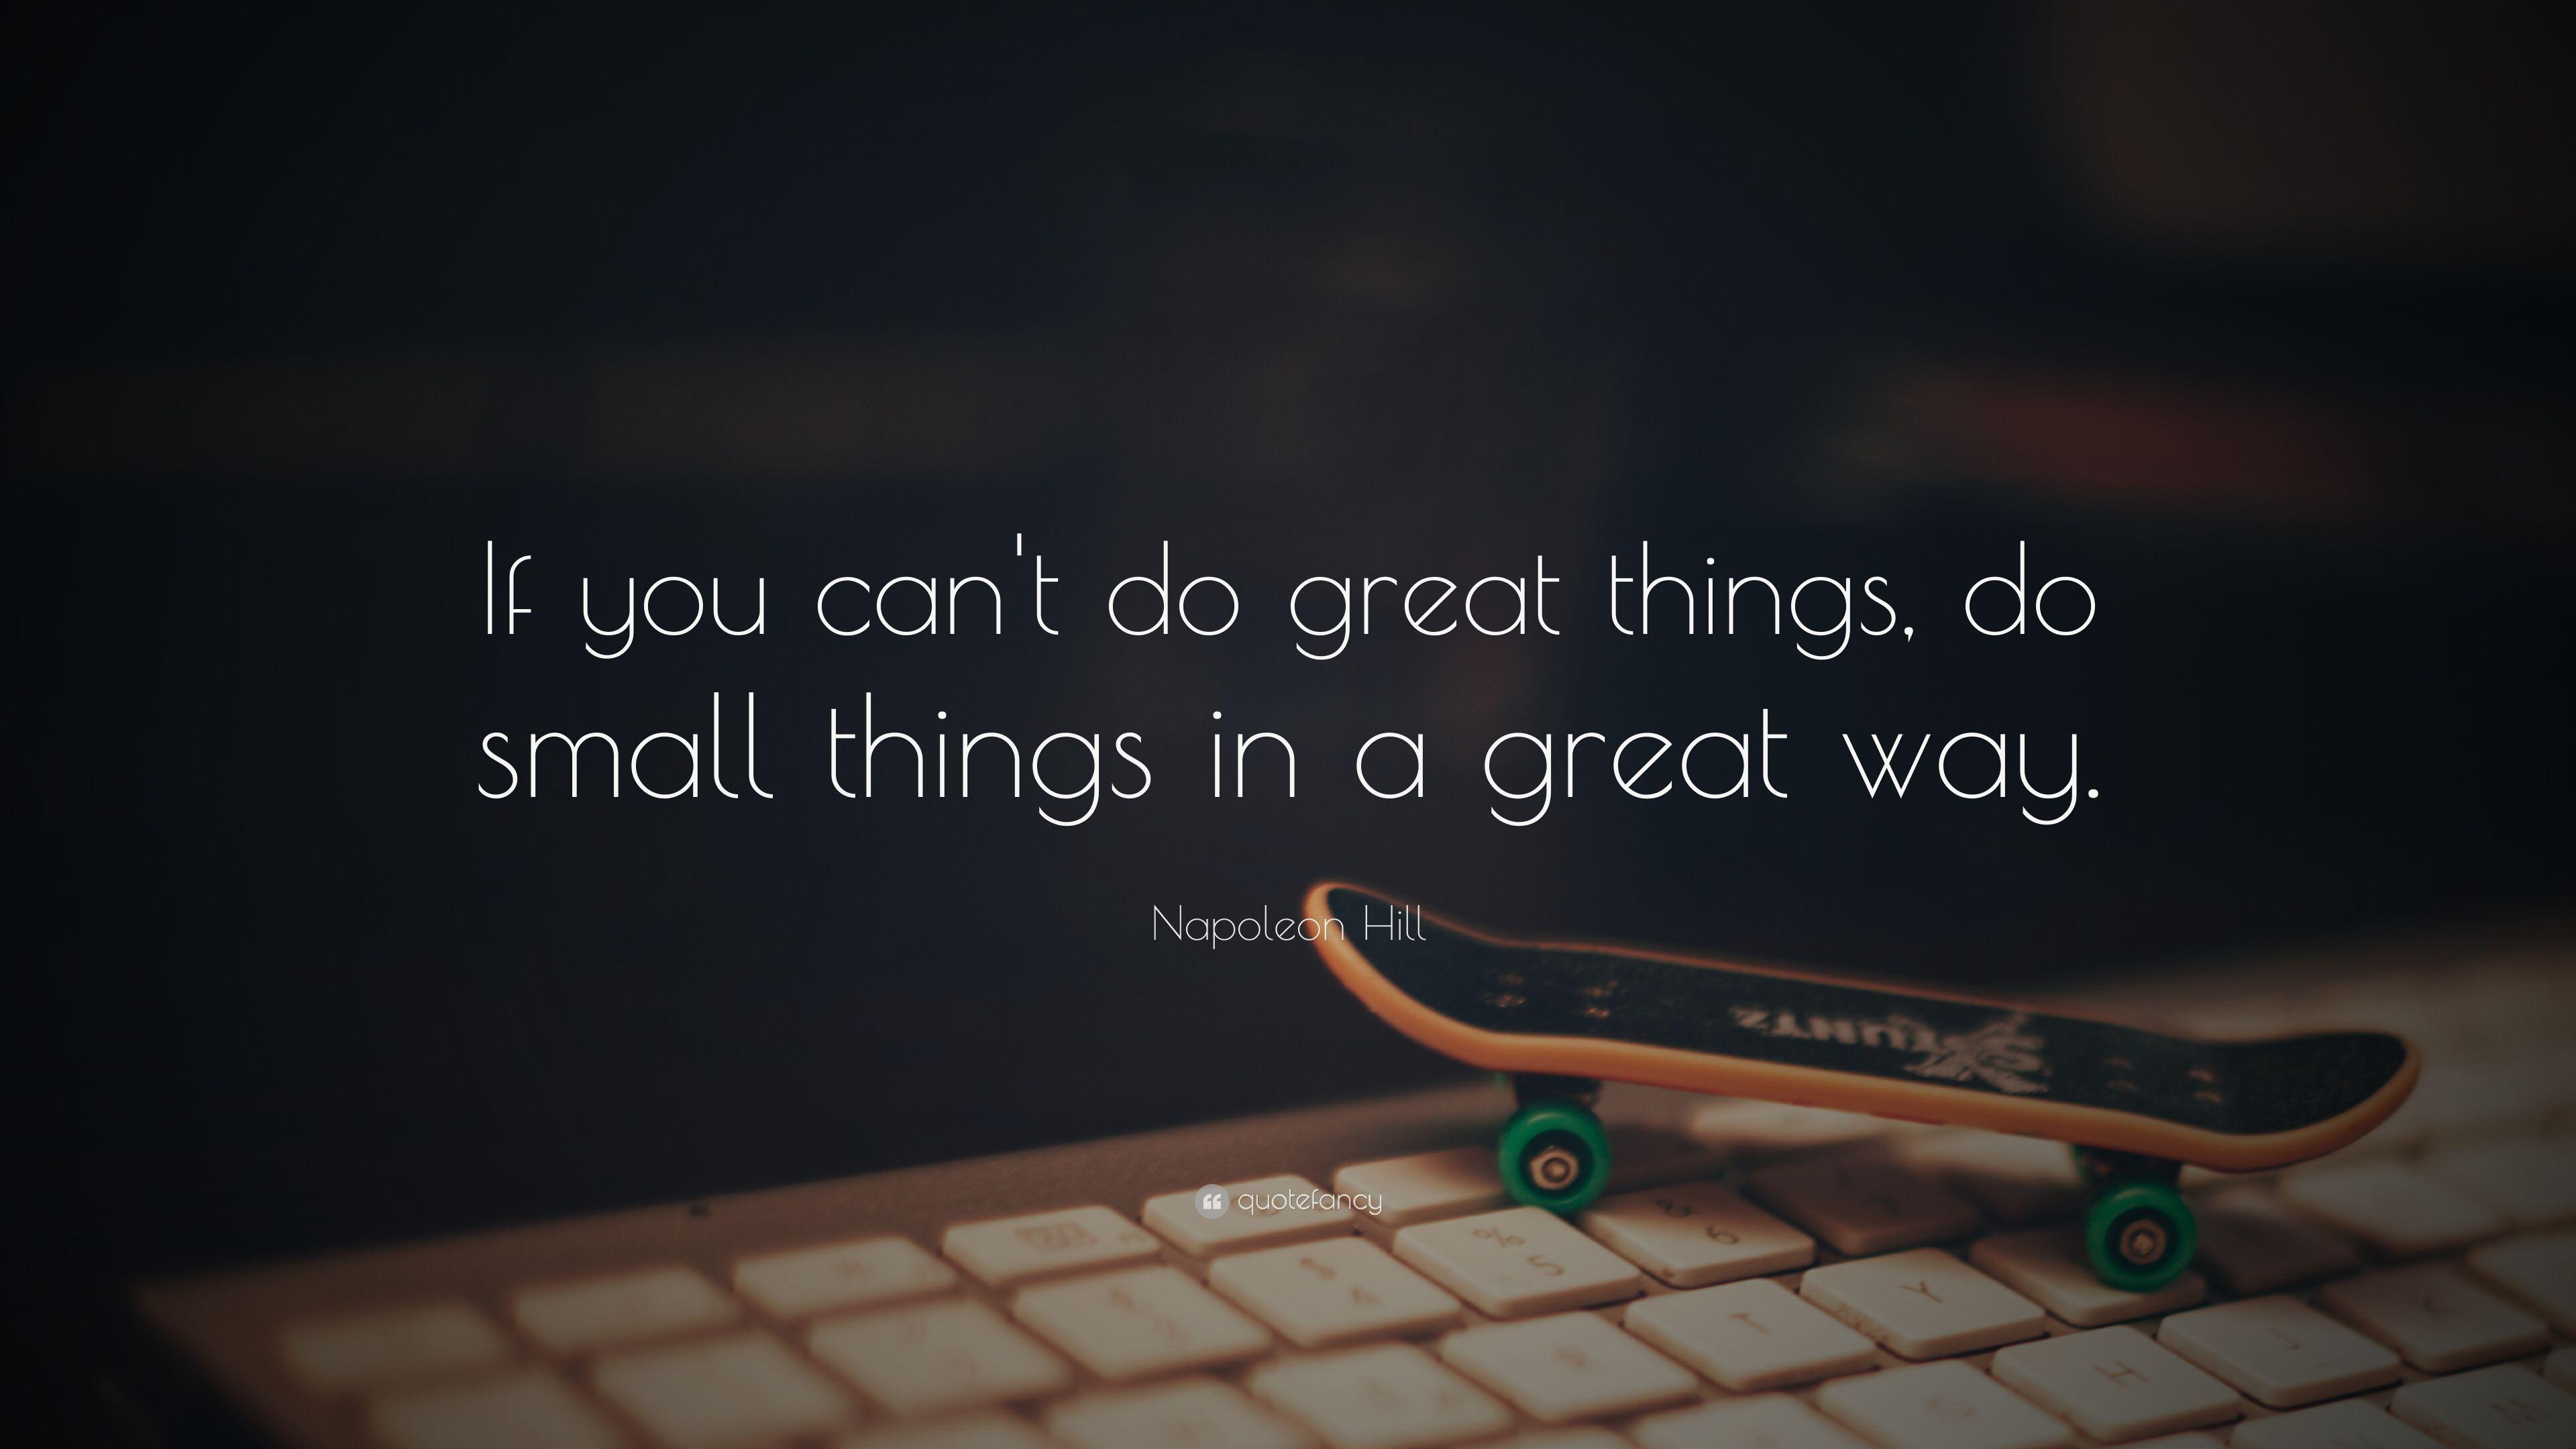 Napoleon Hill Quote: “If you can't do great things, do small